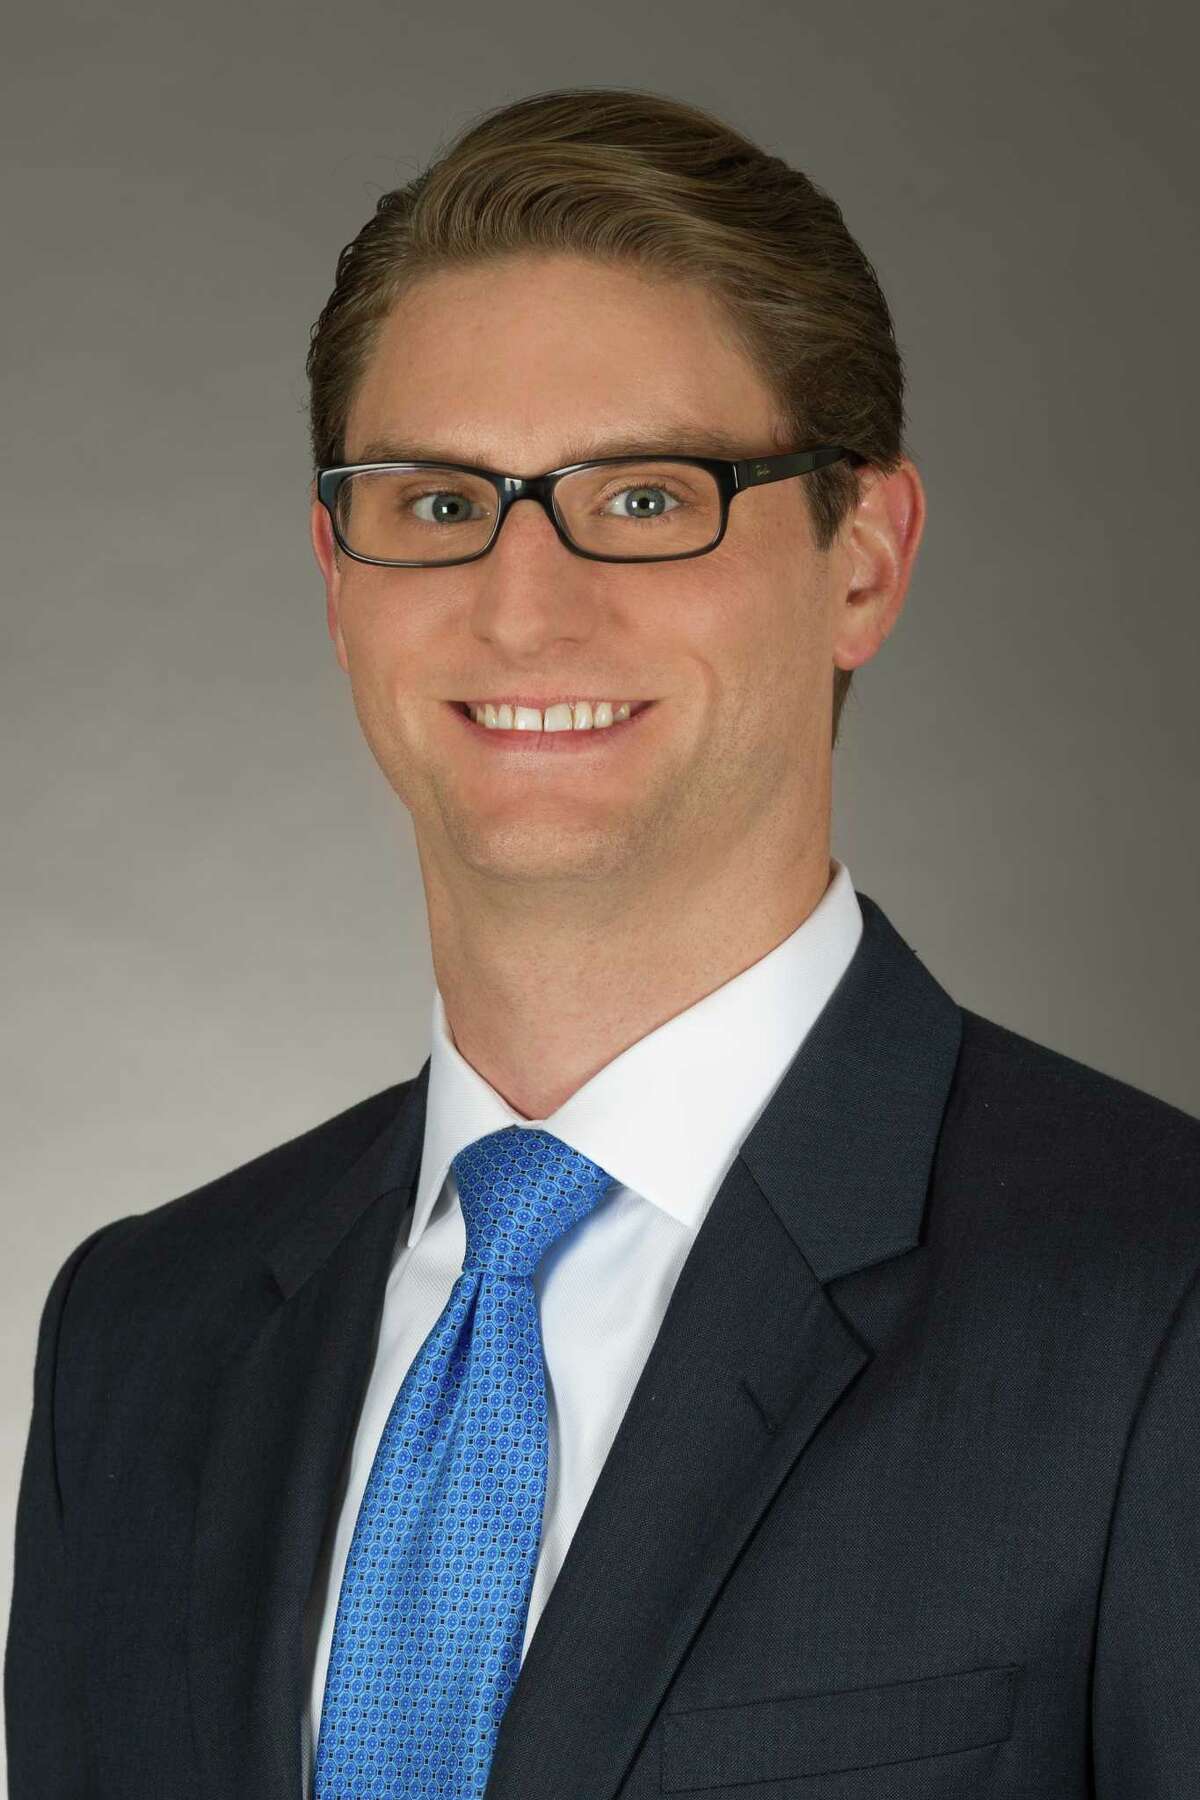 Nicholas Dickerson has been promoted to partner in the Houston office of Locke Lord. Dickerson focuses his practice on commercial litigation and white collar criminal defense.